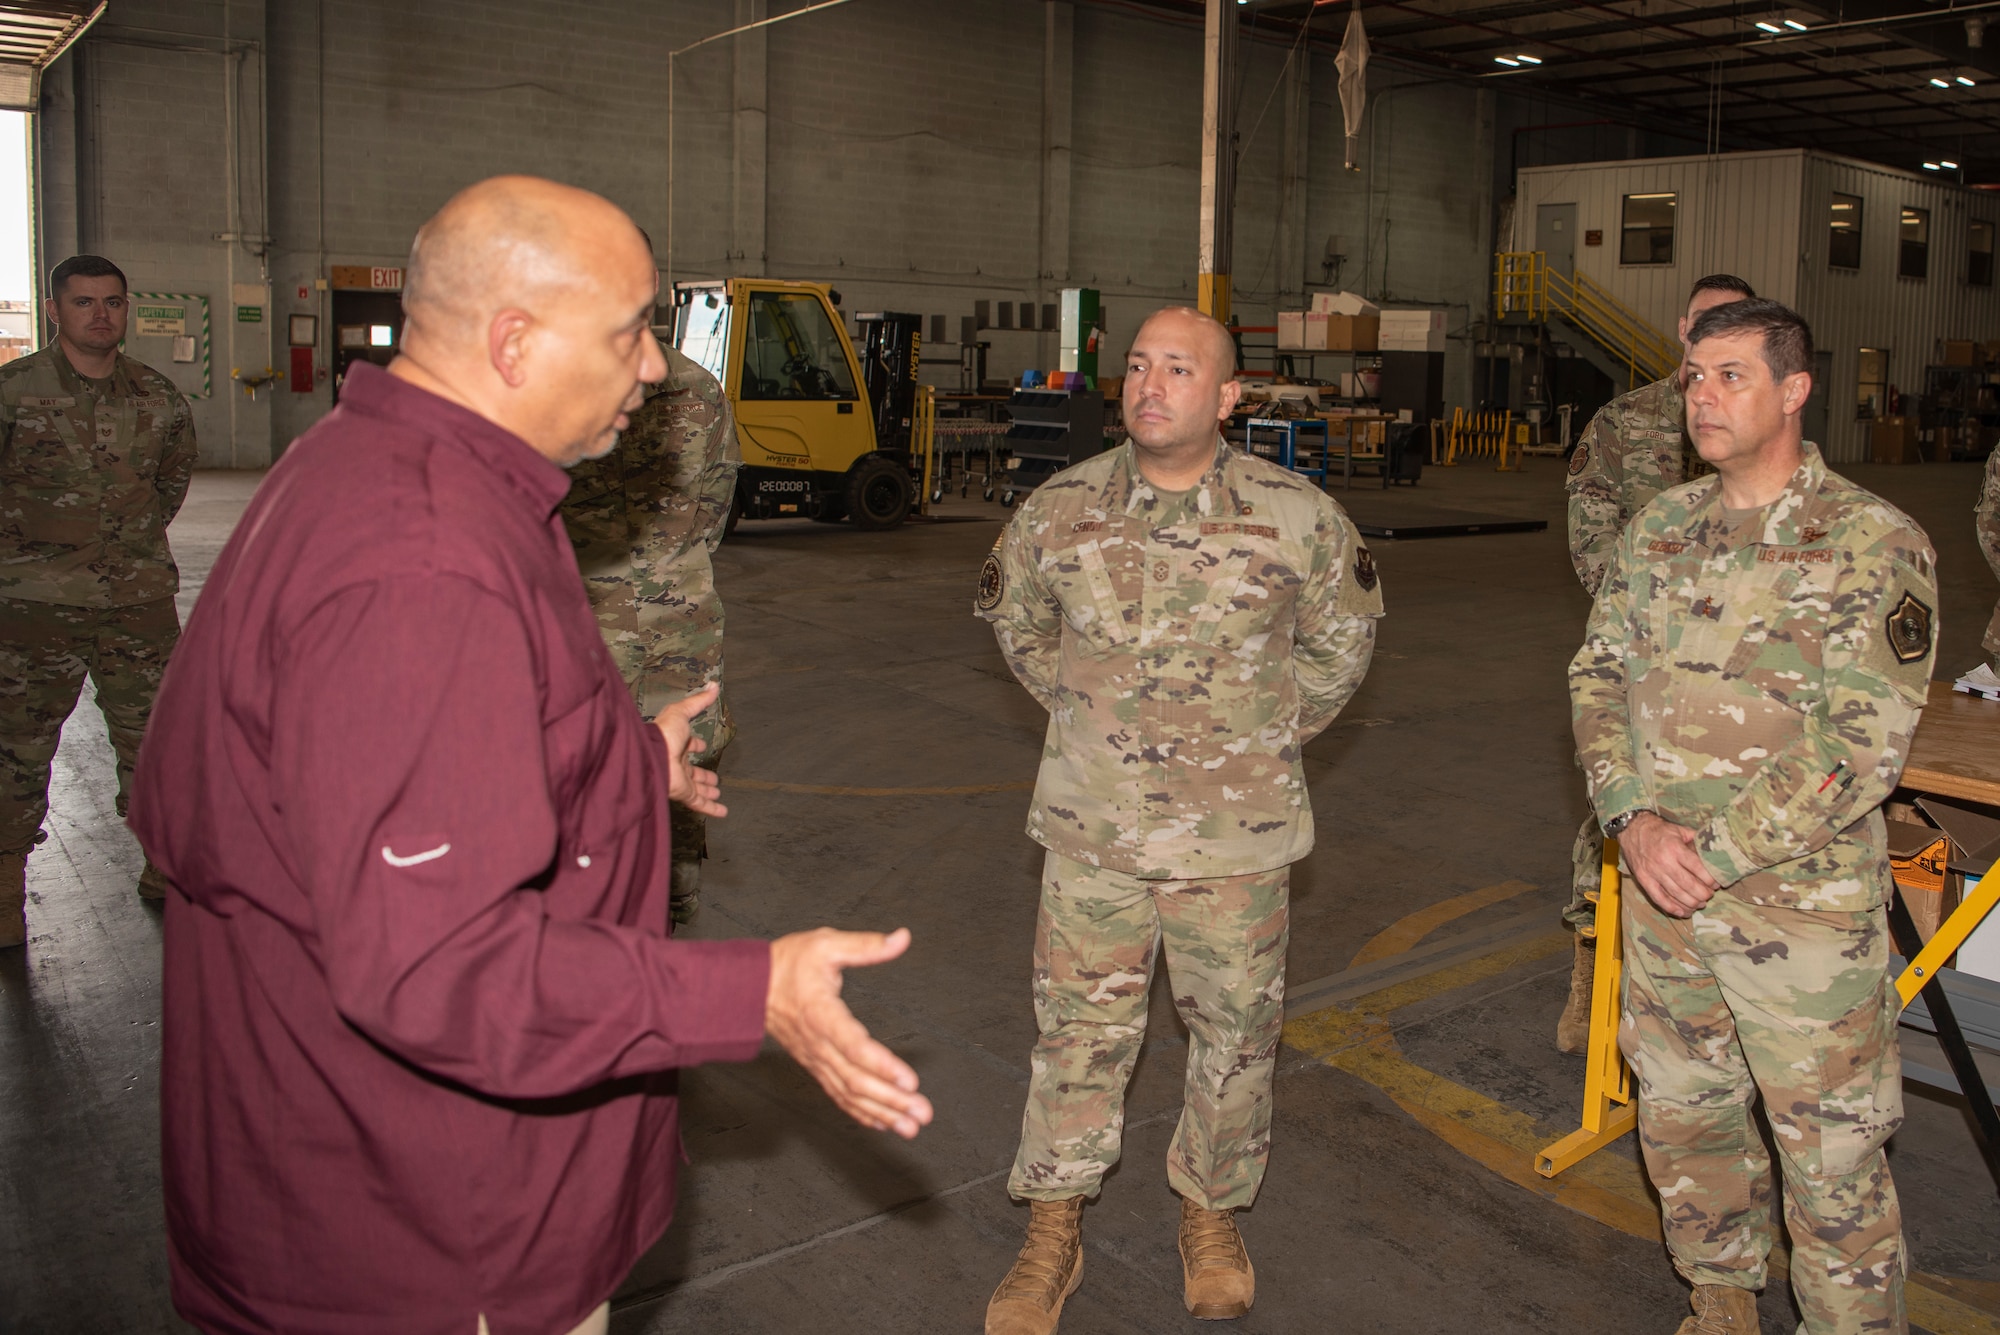 Maj. Gen. Andrew Gebara, 8th Air Force and Joint-Global Strike Operations Center commander, and Chief Master Sgt. Steve Cenov, 8th AF command chief and J-GSOC senior enlisted leader, tours the 7th Logistics Readiness Squadron at Dyess Air Force Base, Texas, Jan. 6, 2023. The 8th Air Force command team used the visit as an opportunity to discuss the importance of Striker Airmen and the role they play in support of strategic deterrence and the global strike mission. (U.S. Air Force photo by Airman 1st Class Ryan Hayman)